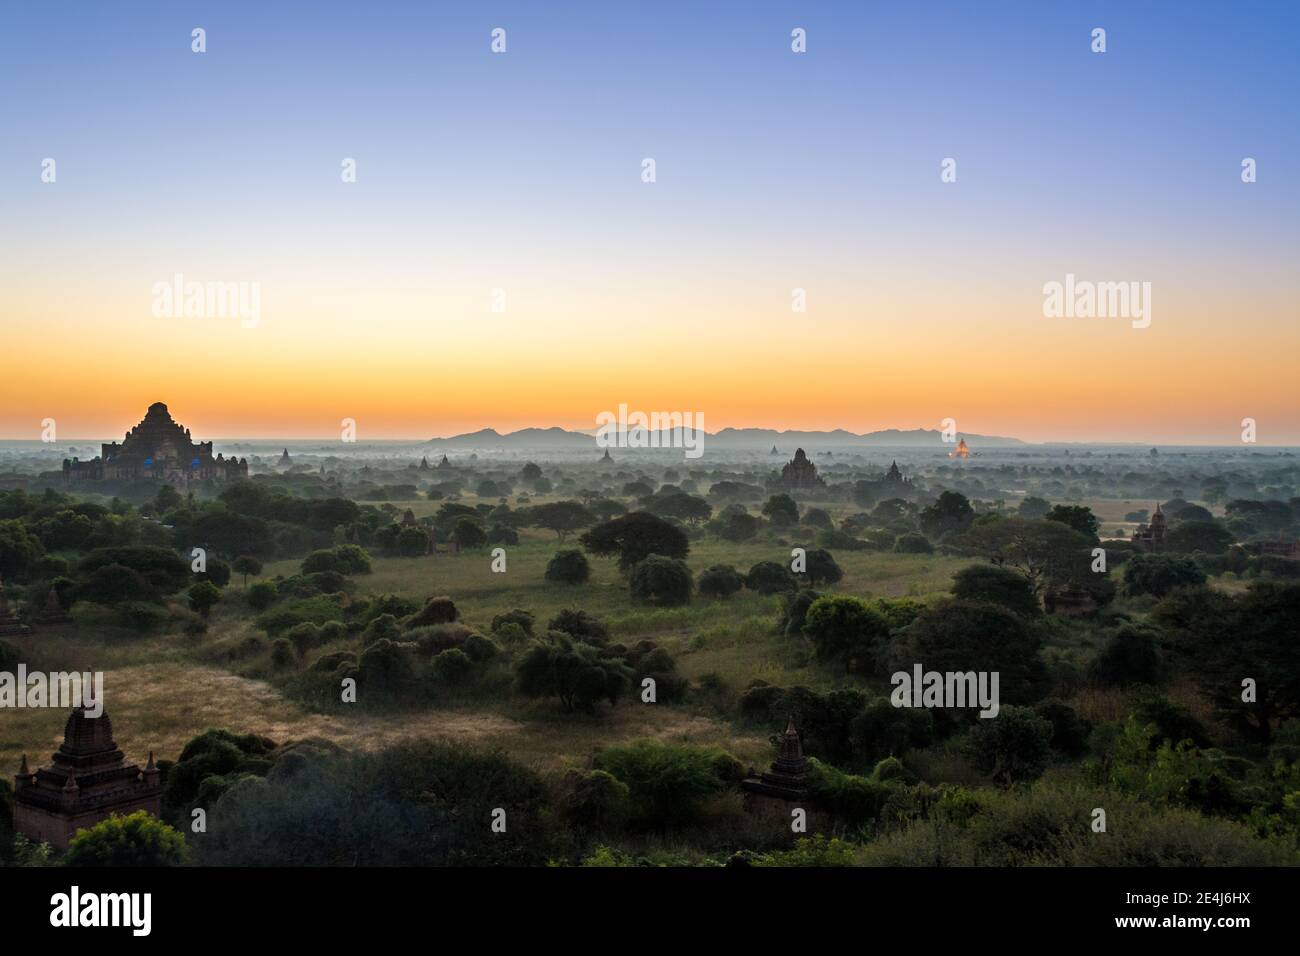 Bagan, Myanmar - View of pagodas at sunrise. Landscape of the Bagan Archaeological Zone. UNESCO World Heritage Site in the Mandalay Region of Myanmar. Stock Photo